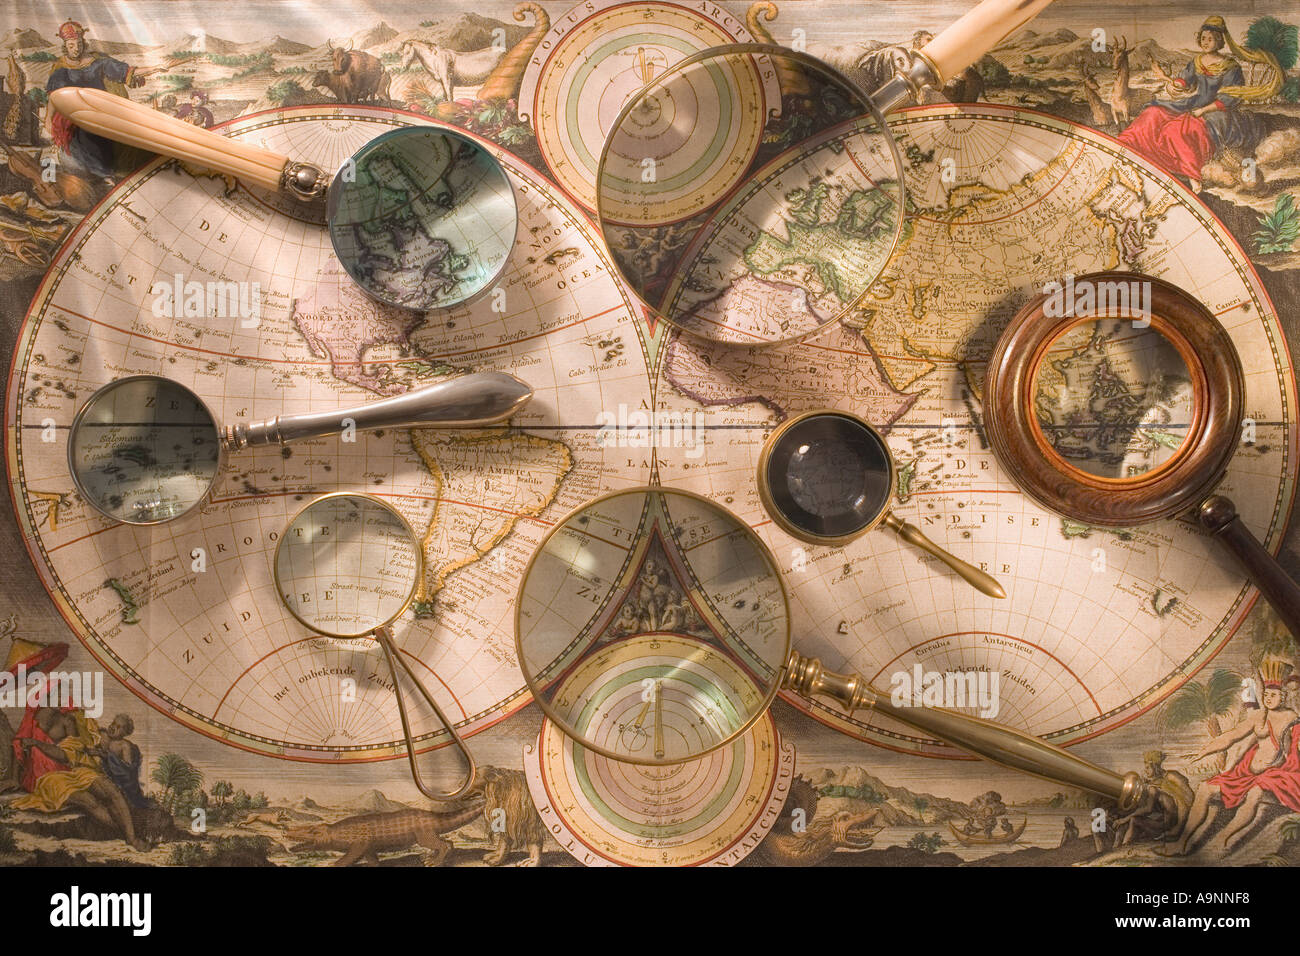 Still life of old map with magnifying glasses Stock Photo